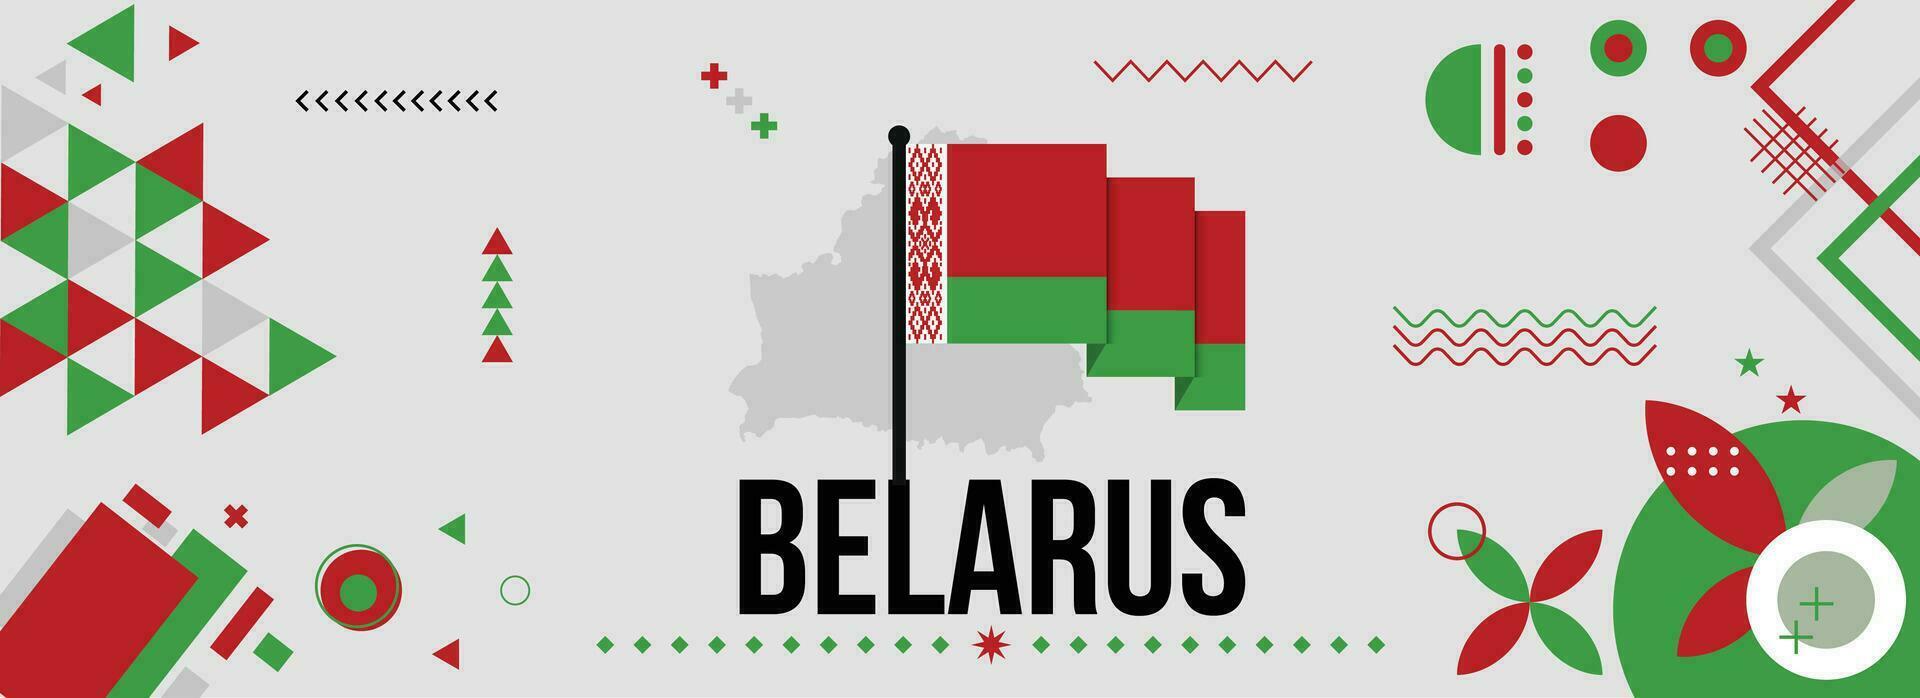 Belarus national or independence day banner for country celebration. Flag and map of Belarus with raised fists. Modern retro design with typorgaphy abstract geometric icons. Vector illustration.